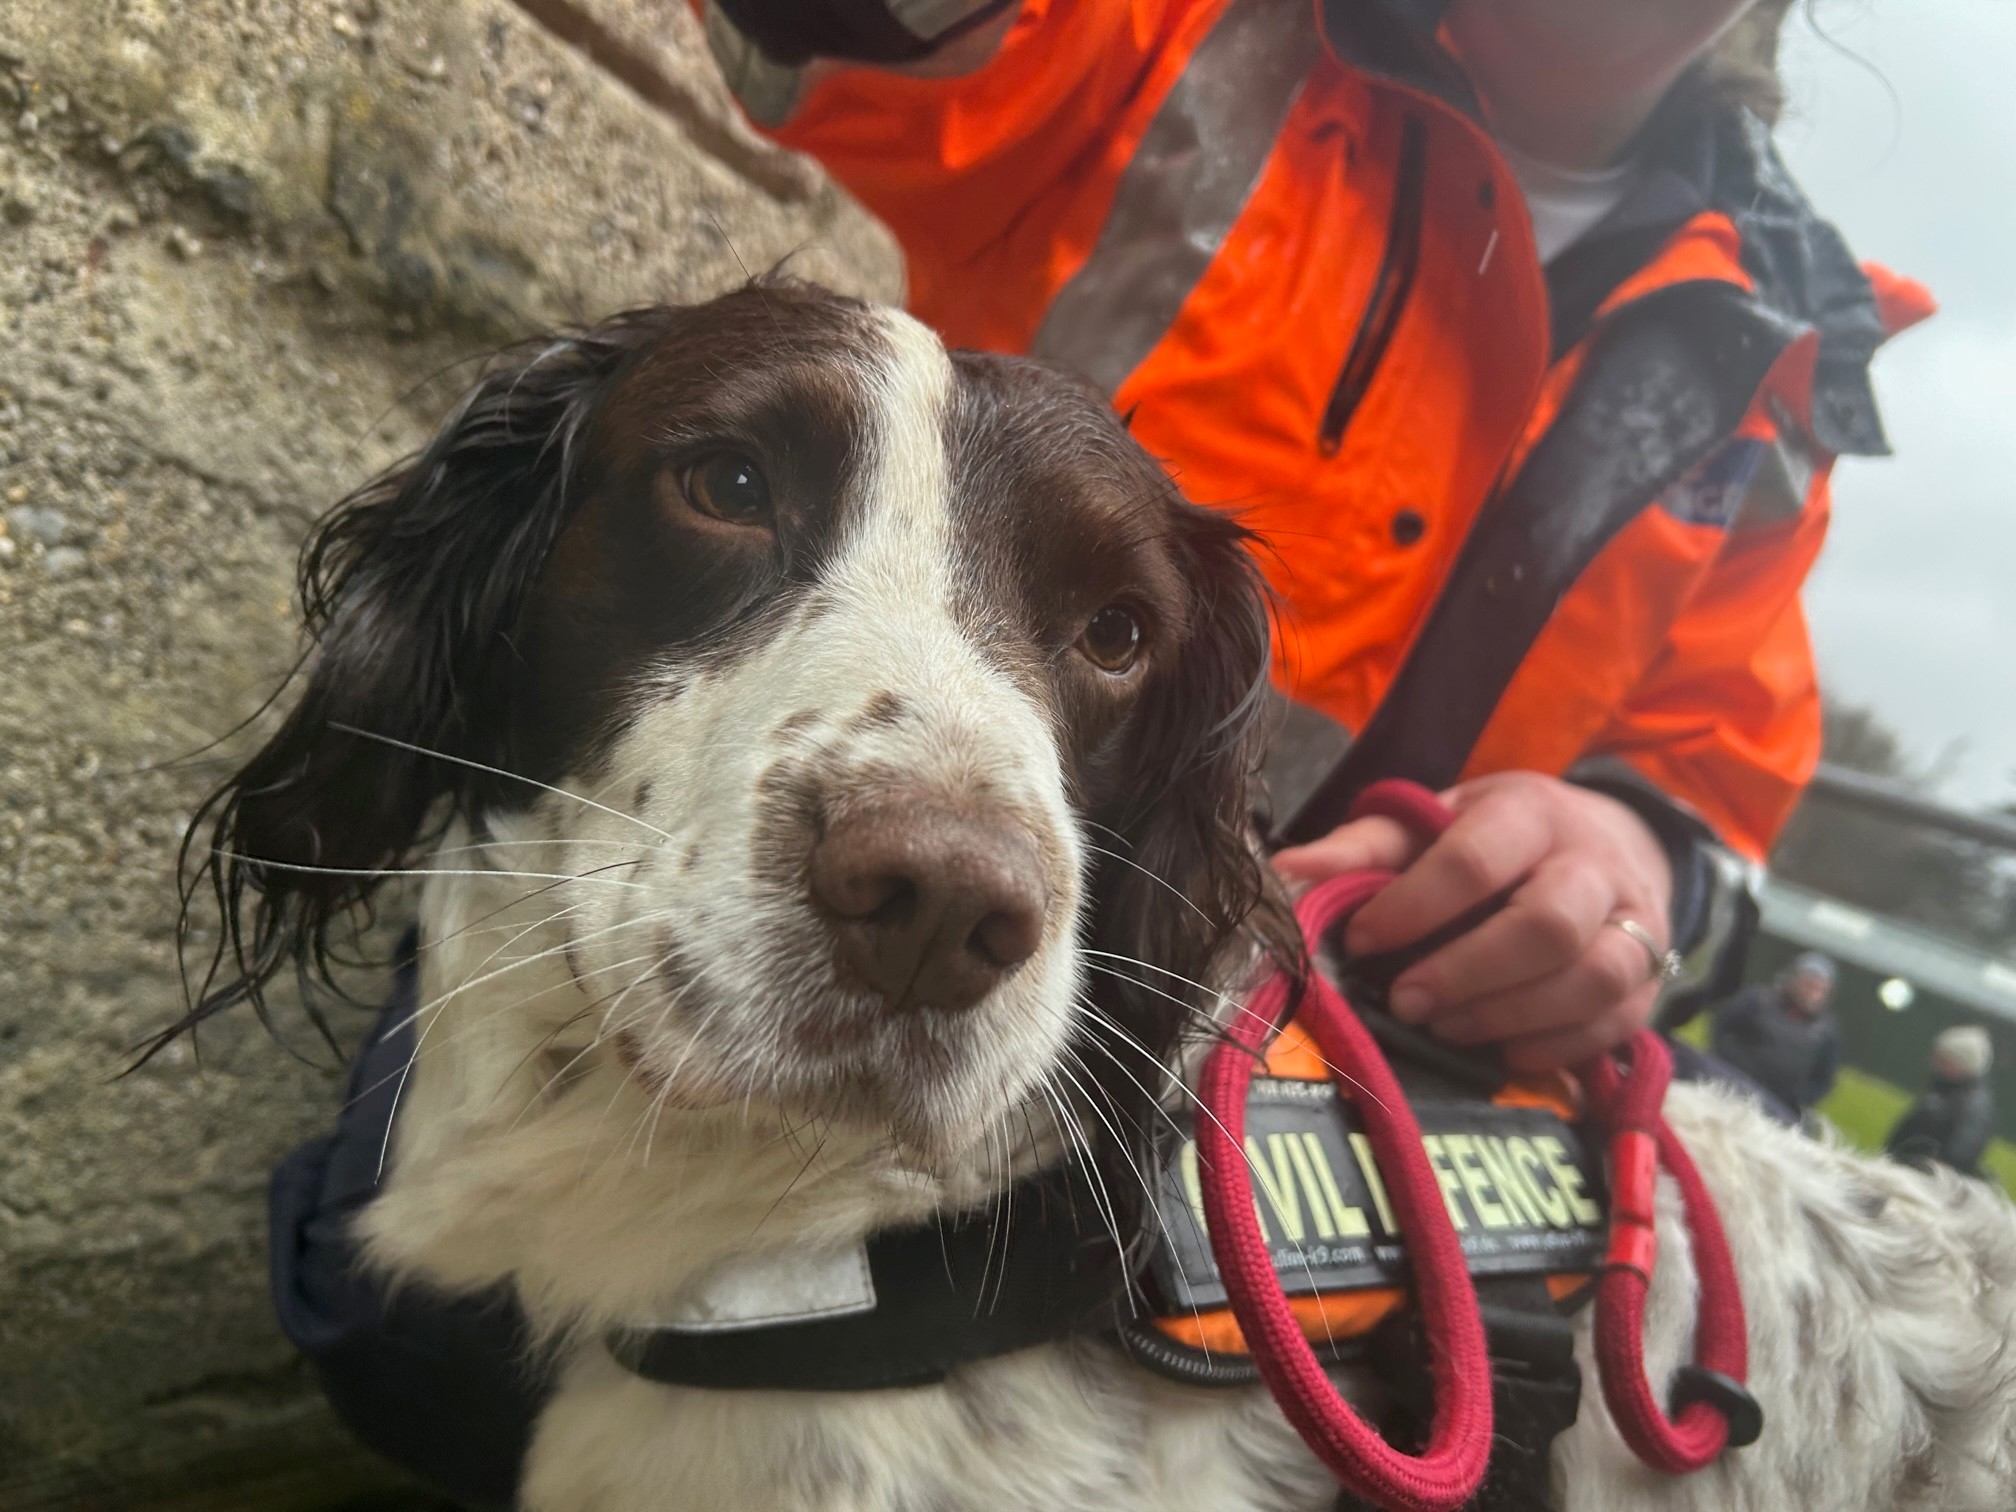 Rossi pictured with his Civil Defence harness